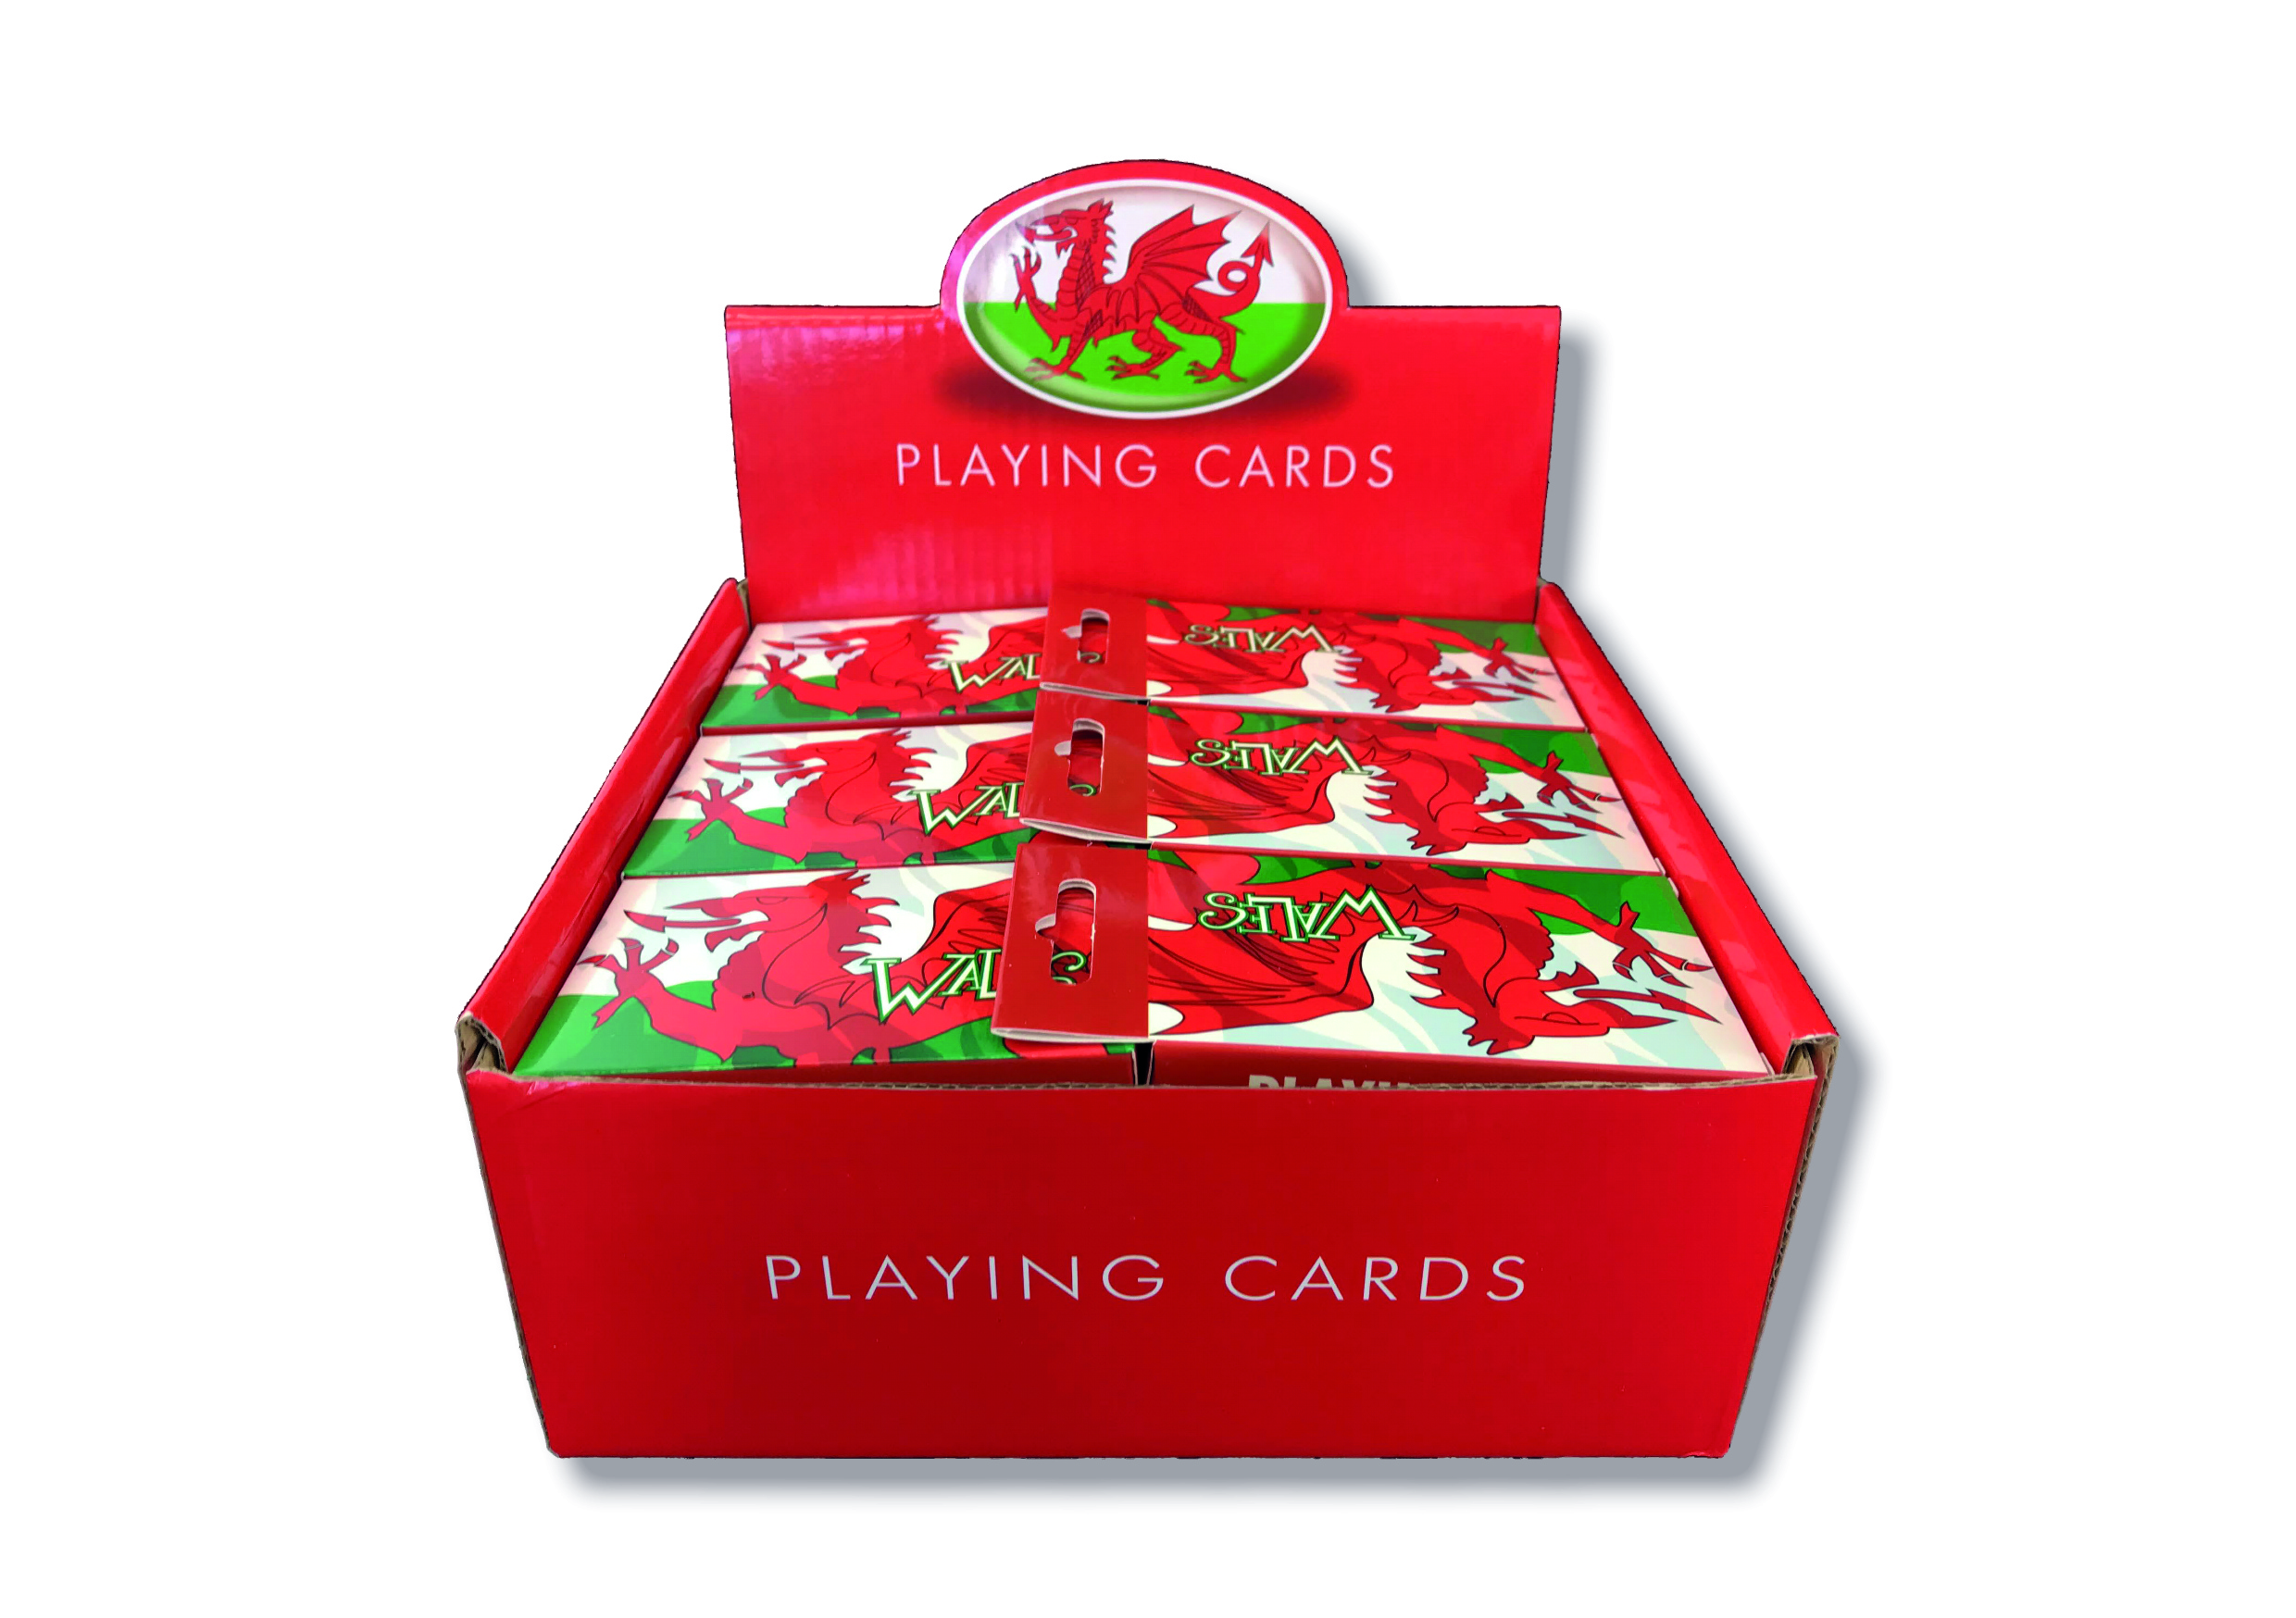 Wales Wavy Flag Playing Cards in display box